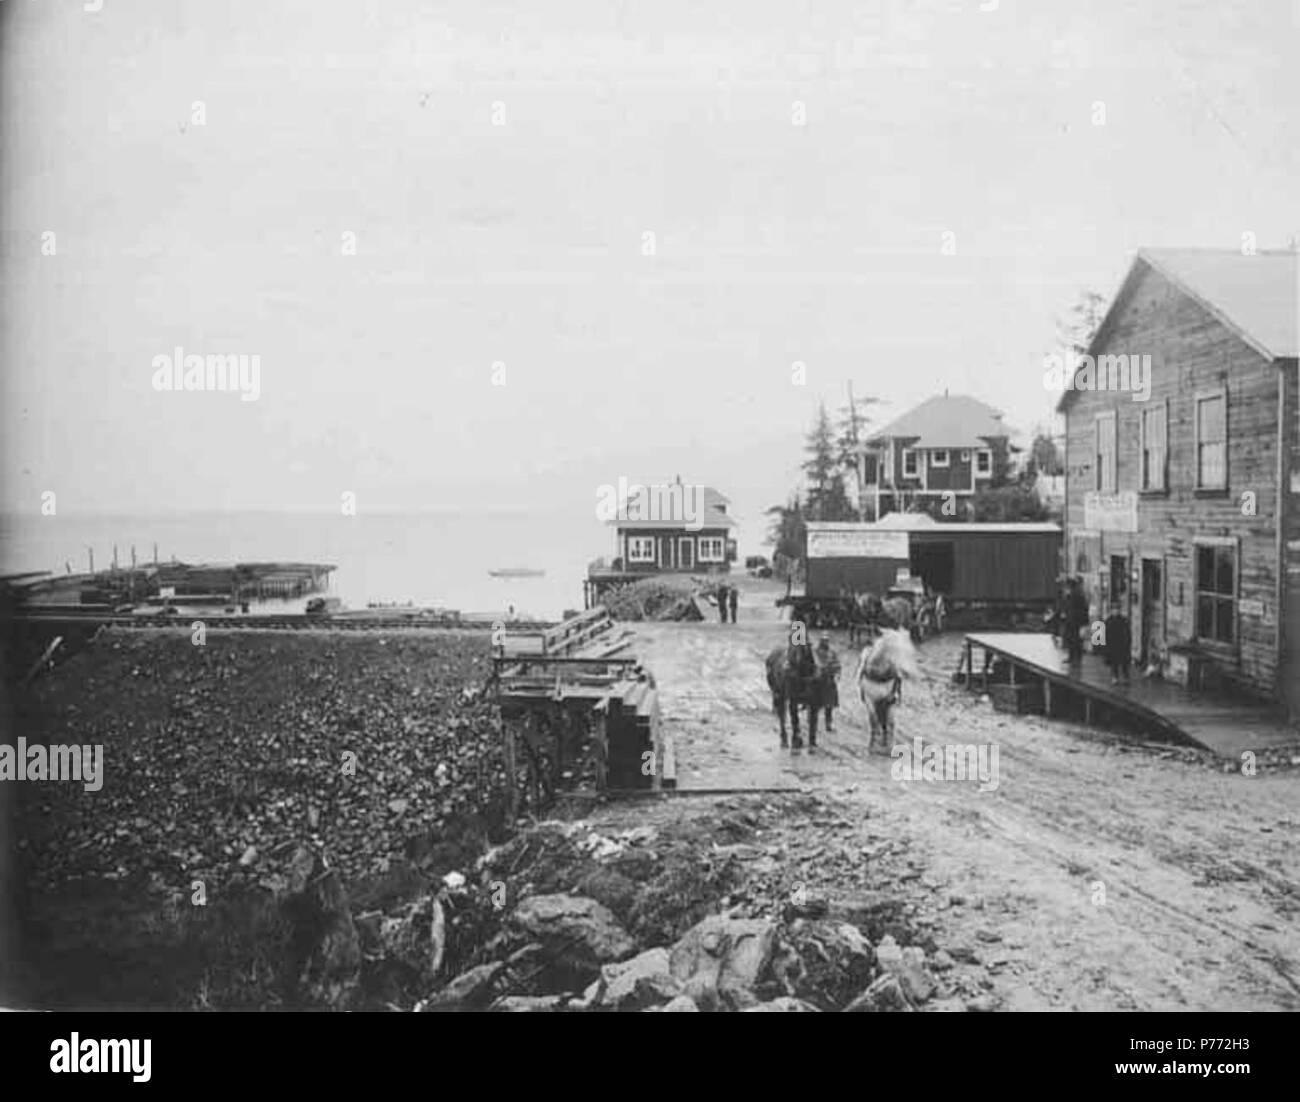 . English: Cordova showing portion of town with railroad tracks in background, ca. 1908 . English: Construction photographs of the Copper River and Northwestern Railway along the Copper River from 1906-1911. PH Coll 375.5 Subjects (LCTGM): Cities & towns--Alaska; Streets--Alaska--Cordova; Horses--Alaska--Cordova; Railroad tracks--Alaska--Cordova Subjects (LCSH): Cordova (Alaska)  . 1908 3 Cordova showing portion of town with railroad tracks in background, ca 1908 (HEGG 738) Stock Photo